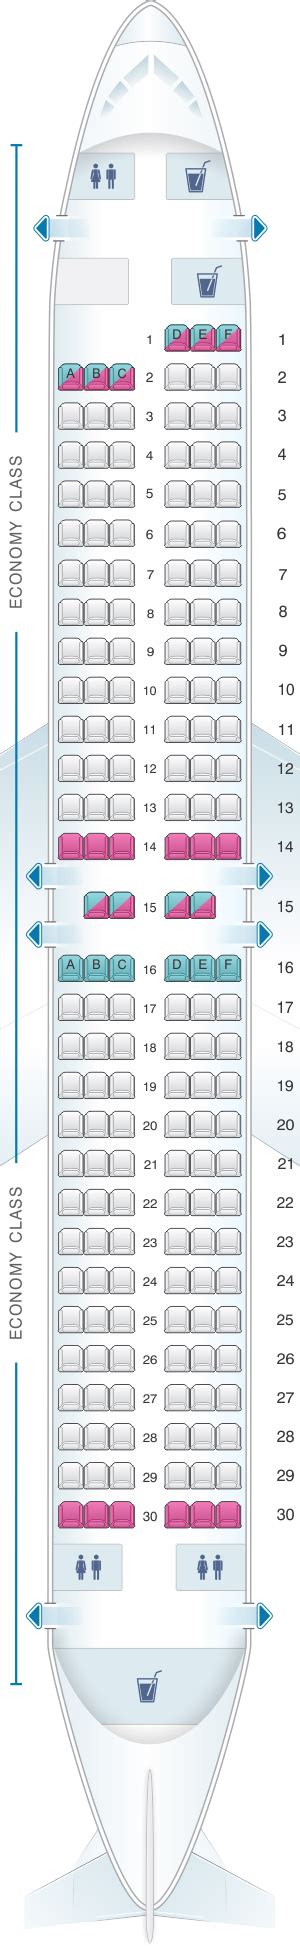 boeing 737 seating chart southwest